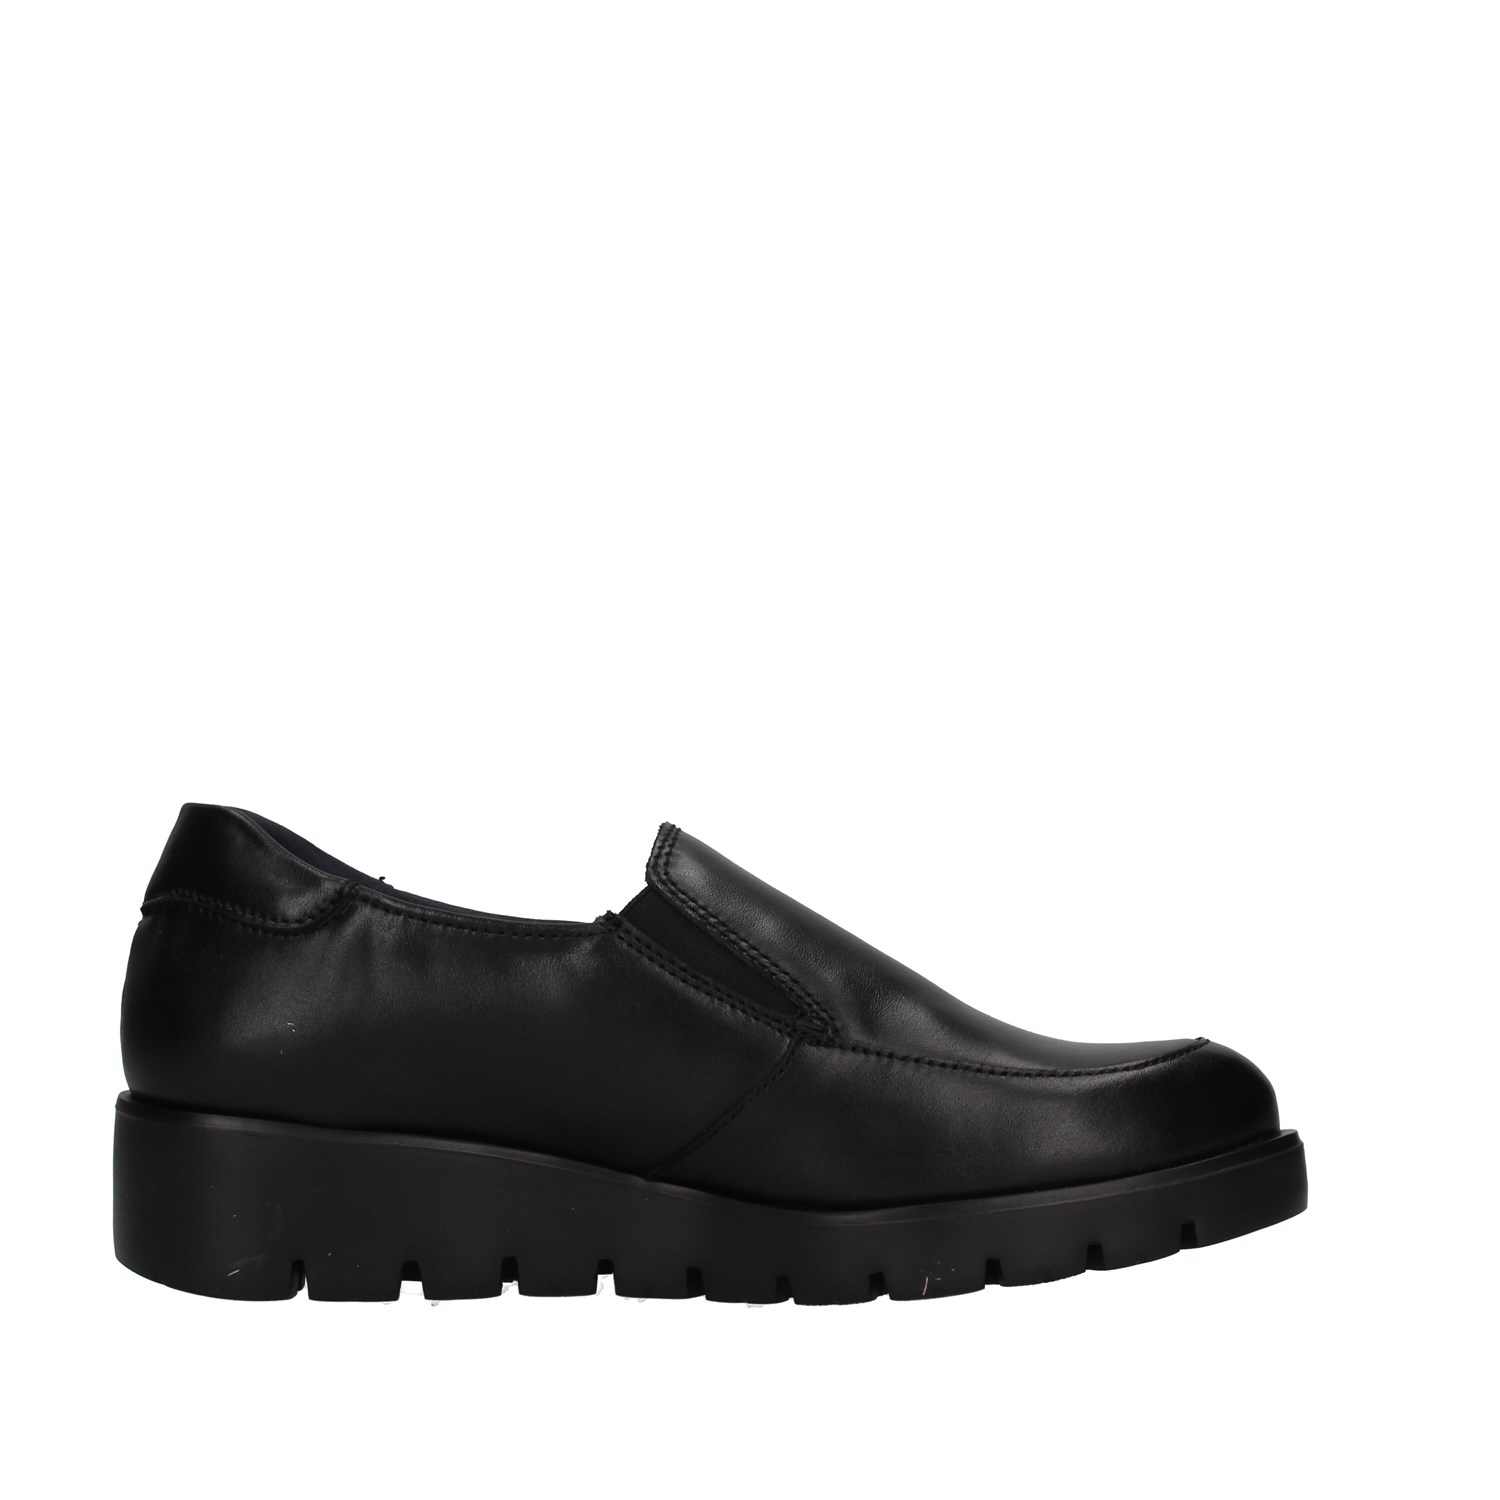 Callaghan Shoes Woman Loafers BLACK 89878